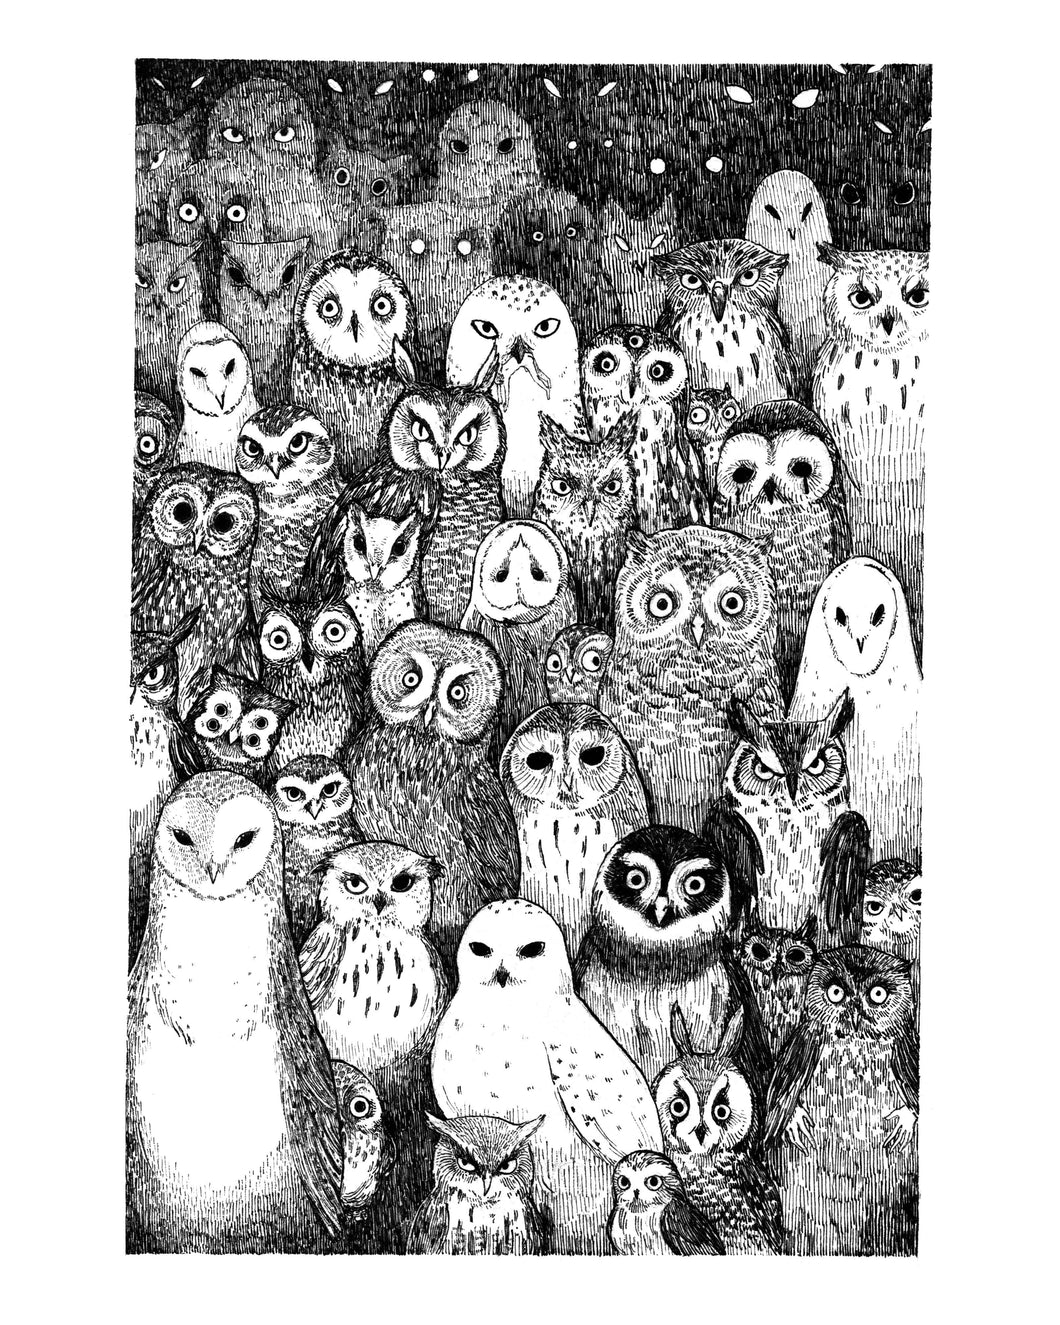 The Owls Are Not What They Seem - 8x10